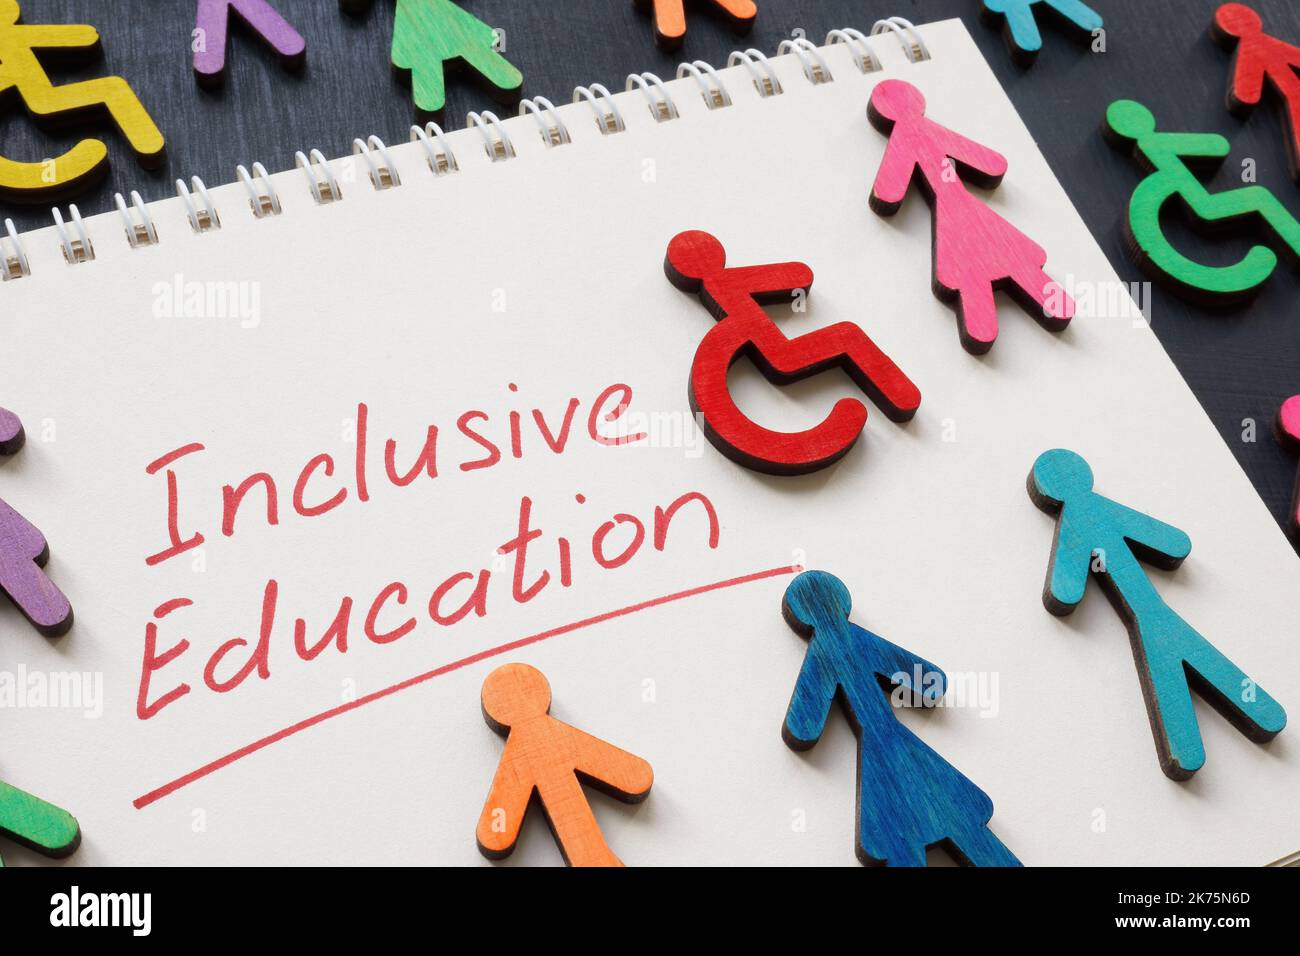 Notepad with phrase Inclusive education and colorful figures. Stock Photo